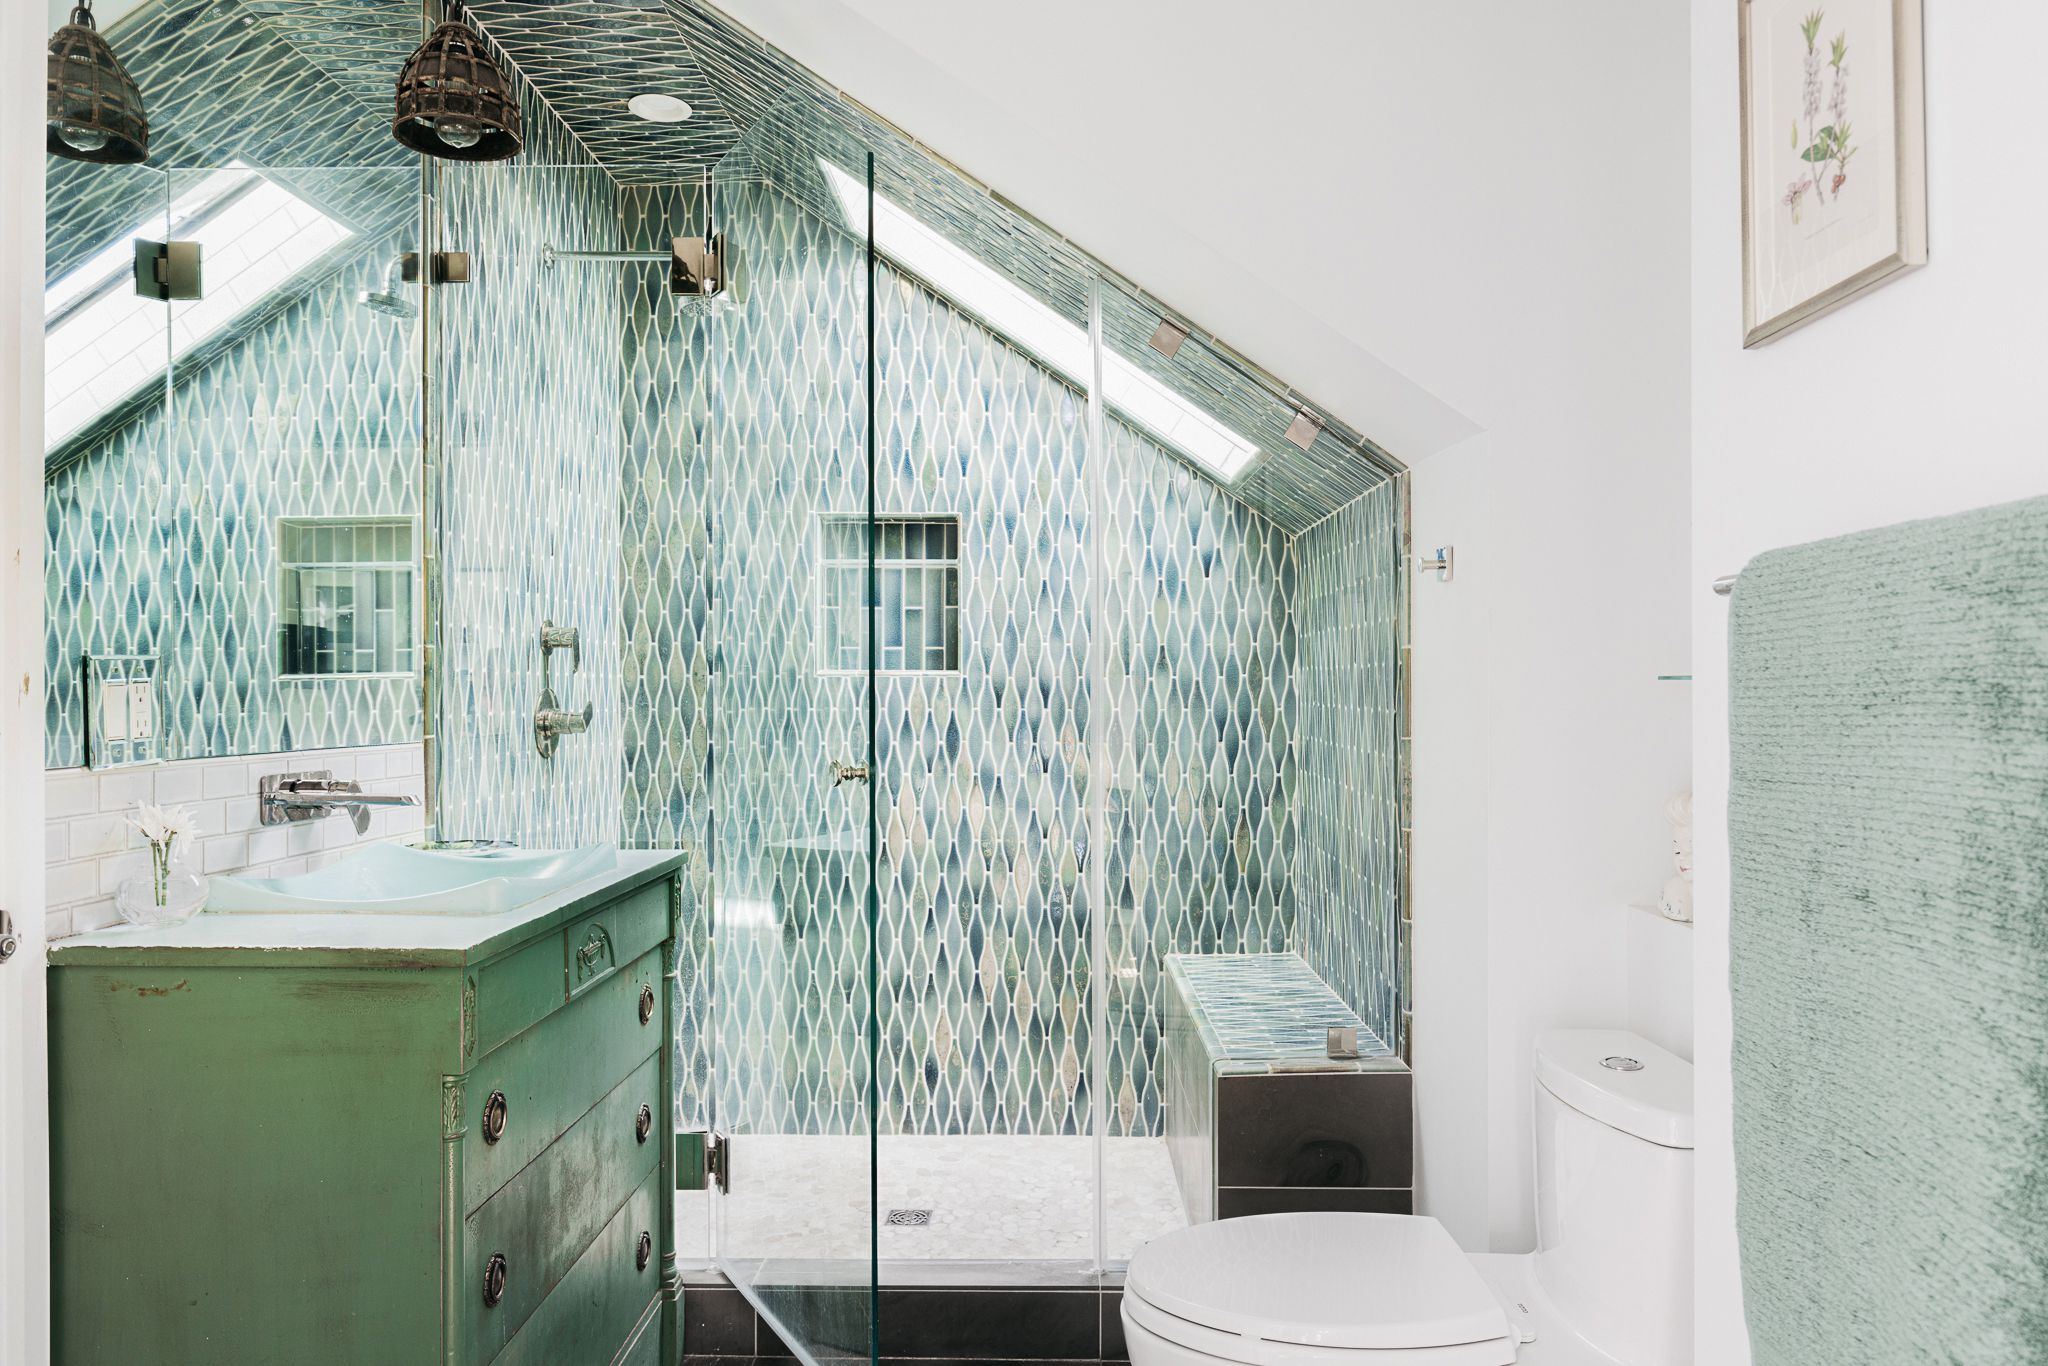 14 Gorgeous Green Bathrooms We Want to Copy